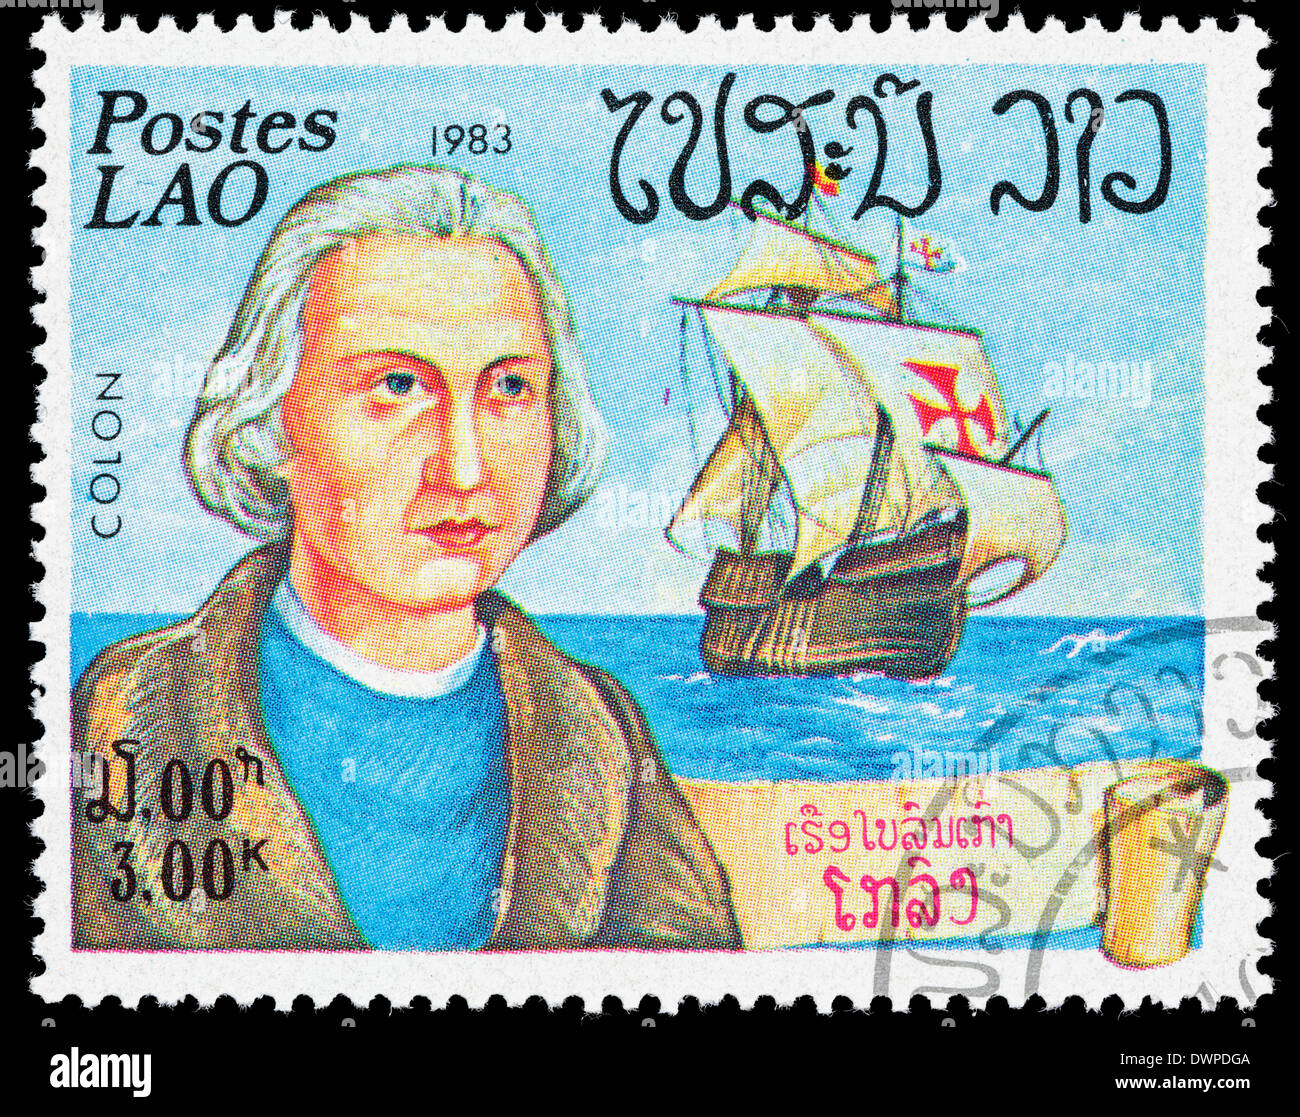 1983 Laos postage stamp containing an illustration of explorer Christopher Columbus. Stock Photo